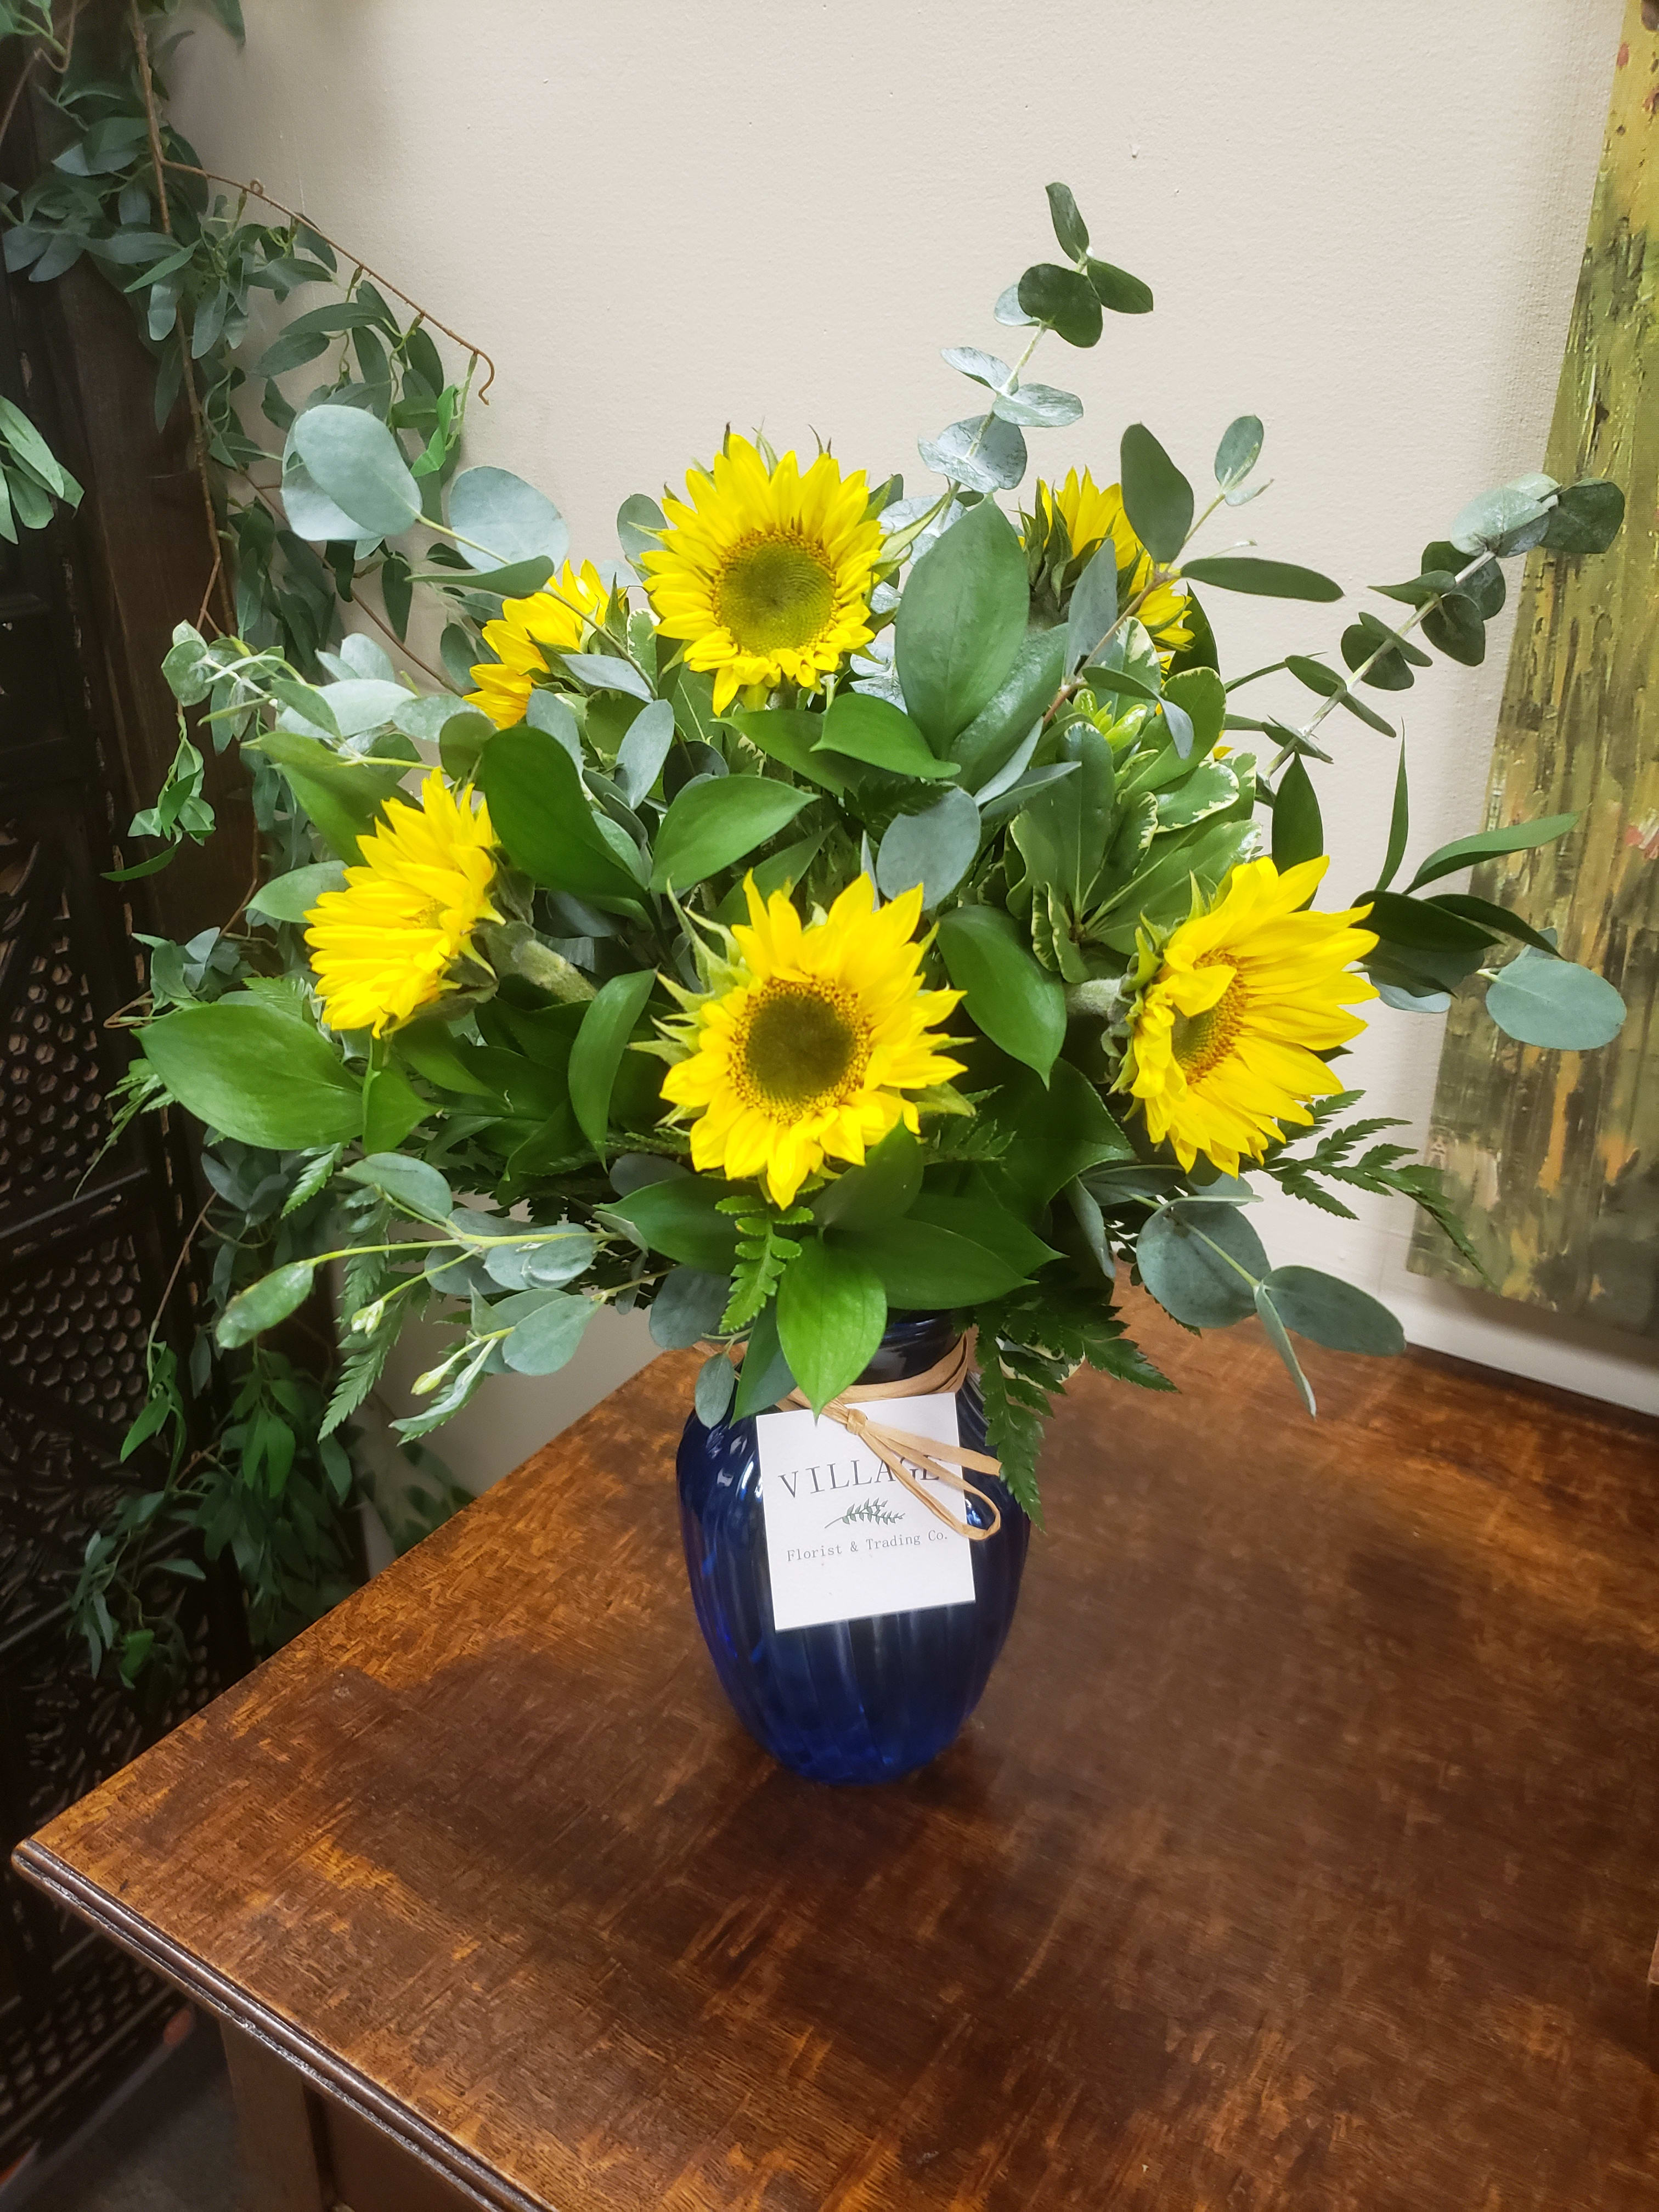 Van Gogh's Sunflowers - Beautiful Sunflowers and Mixed Greenery tastefully arranged in a cobalt vase. Please contact our shop directly for Special Requests, Advance Orders and Custom Funeral Arrangements. We are always glad to accommodate. Call 732-341-3723 or email Danielle at thevillagefloristnj@gmail.com.